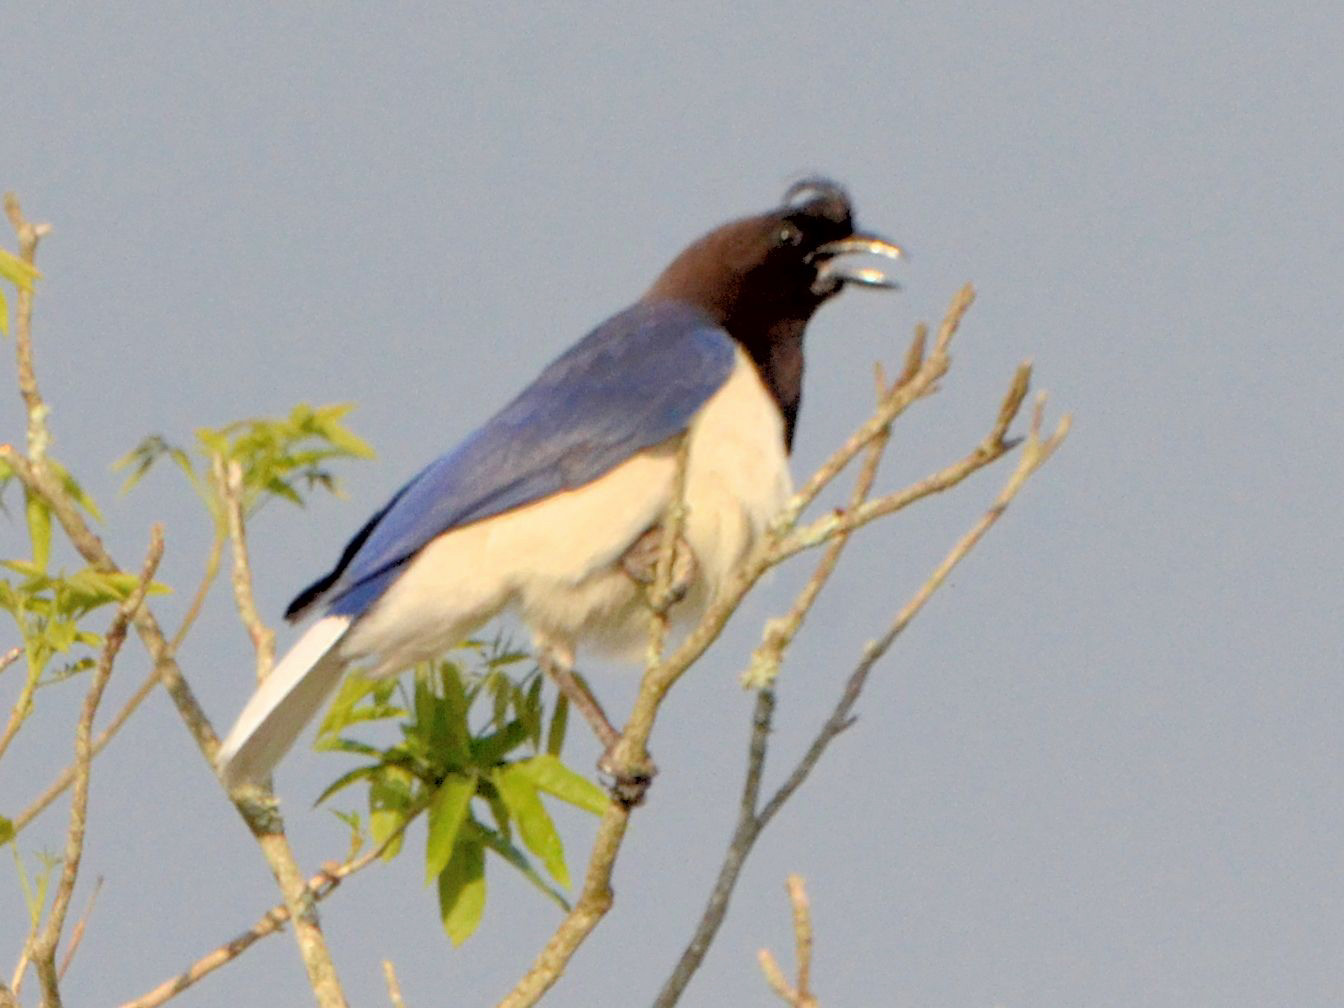 Click picture to see more Curl-crested Jays.